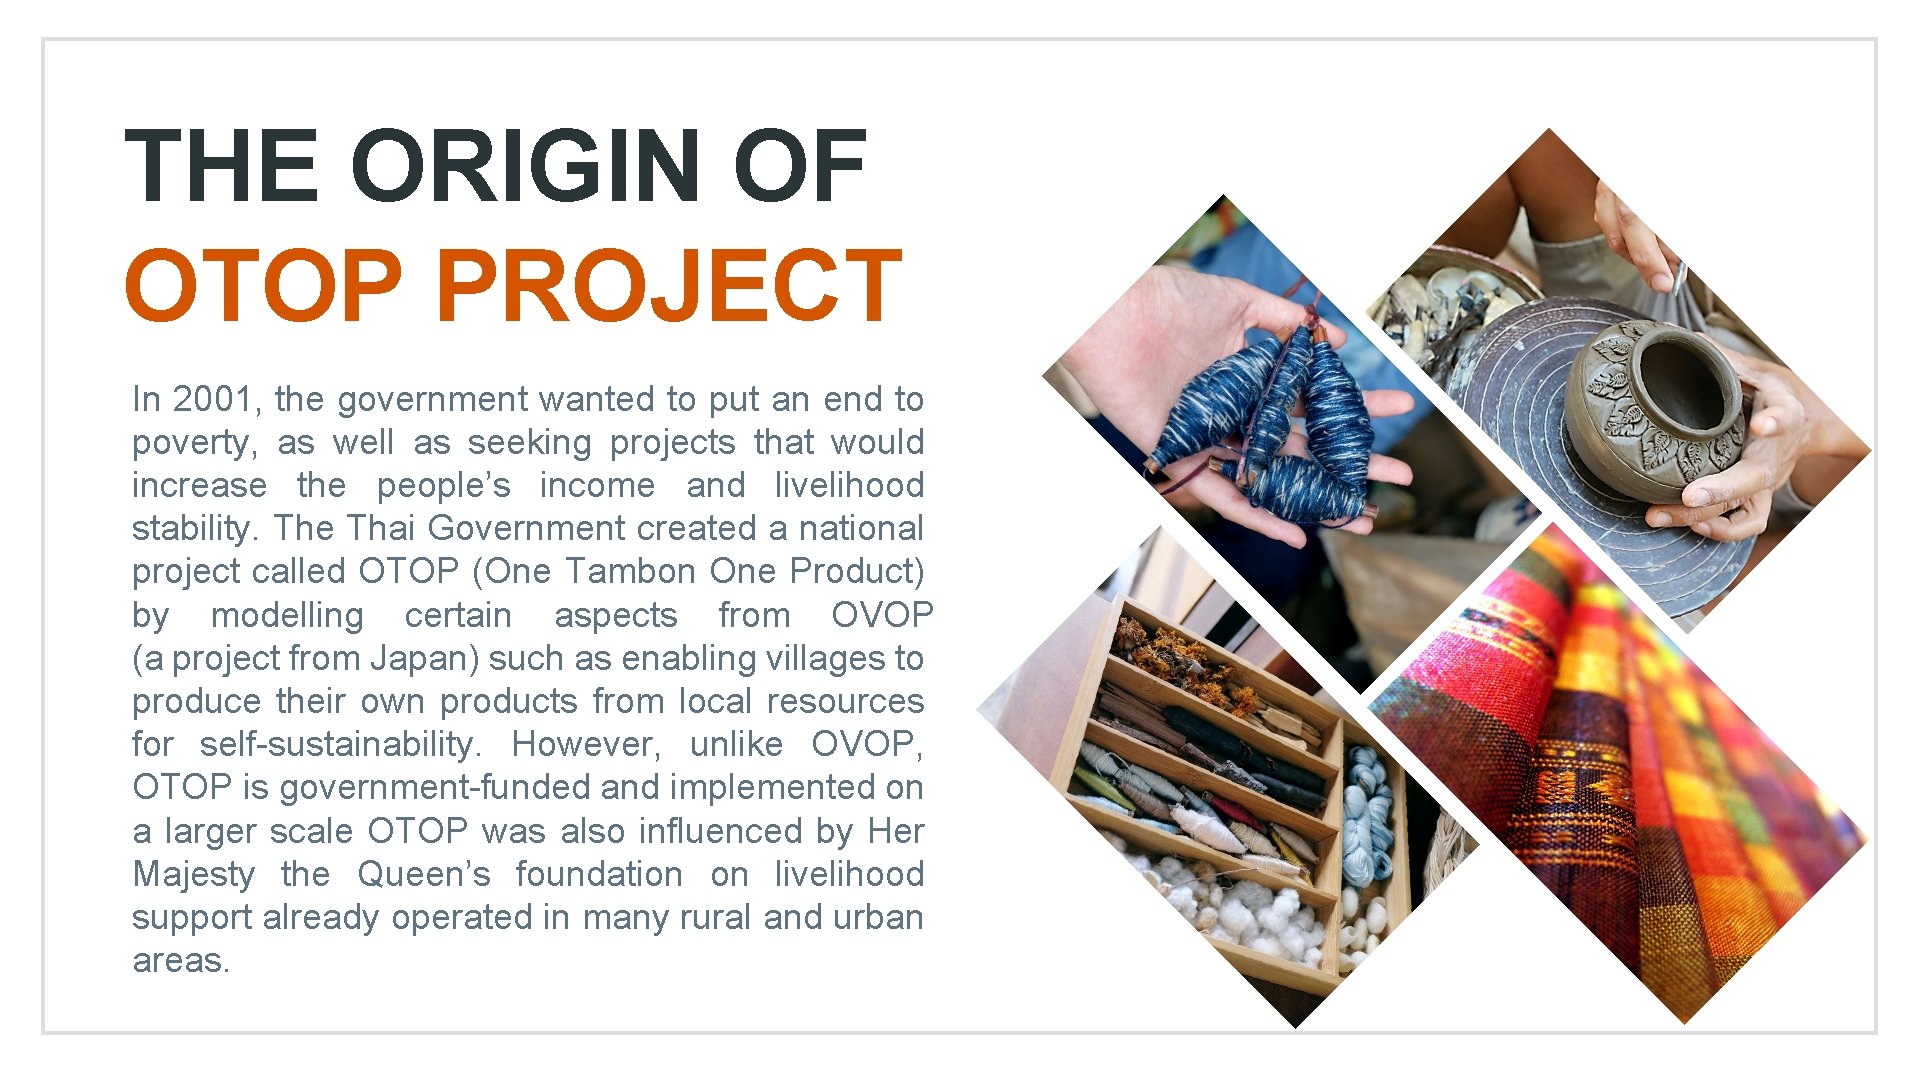 THE ORIGIN OF OTOP PROJECT In 2001, the government wanted to put an end